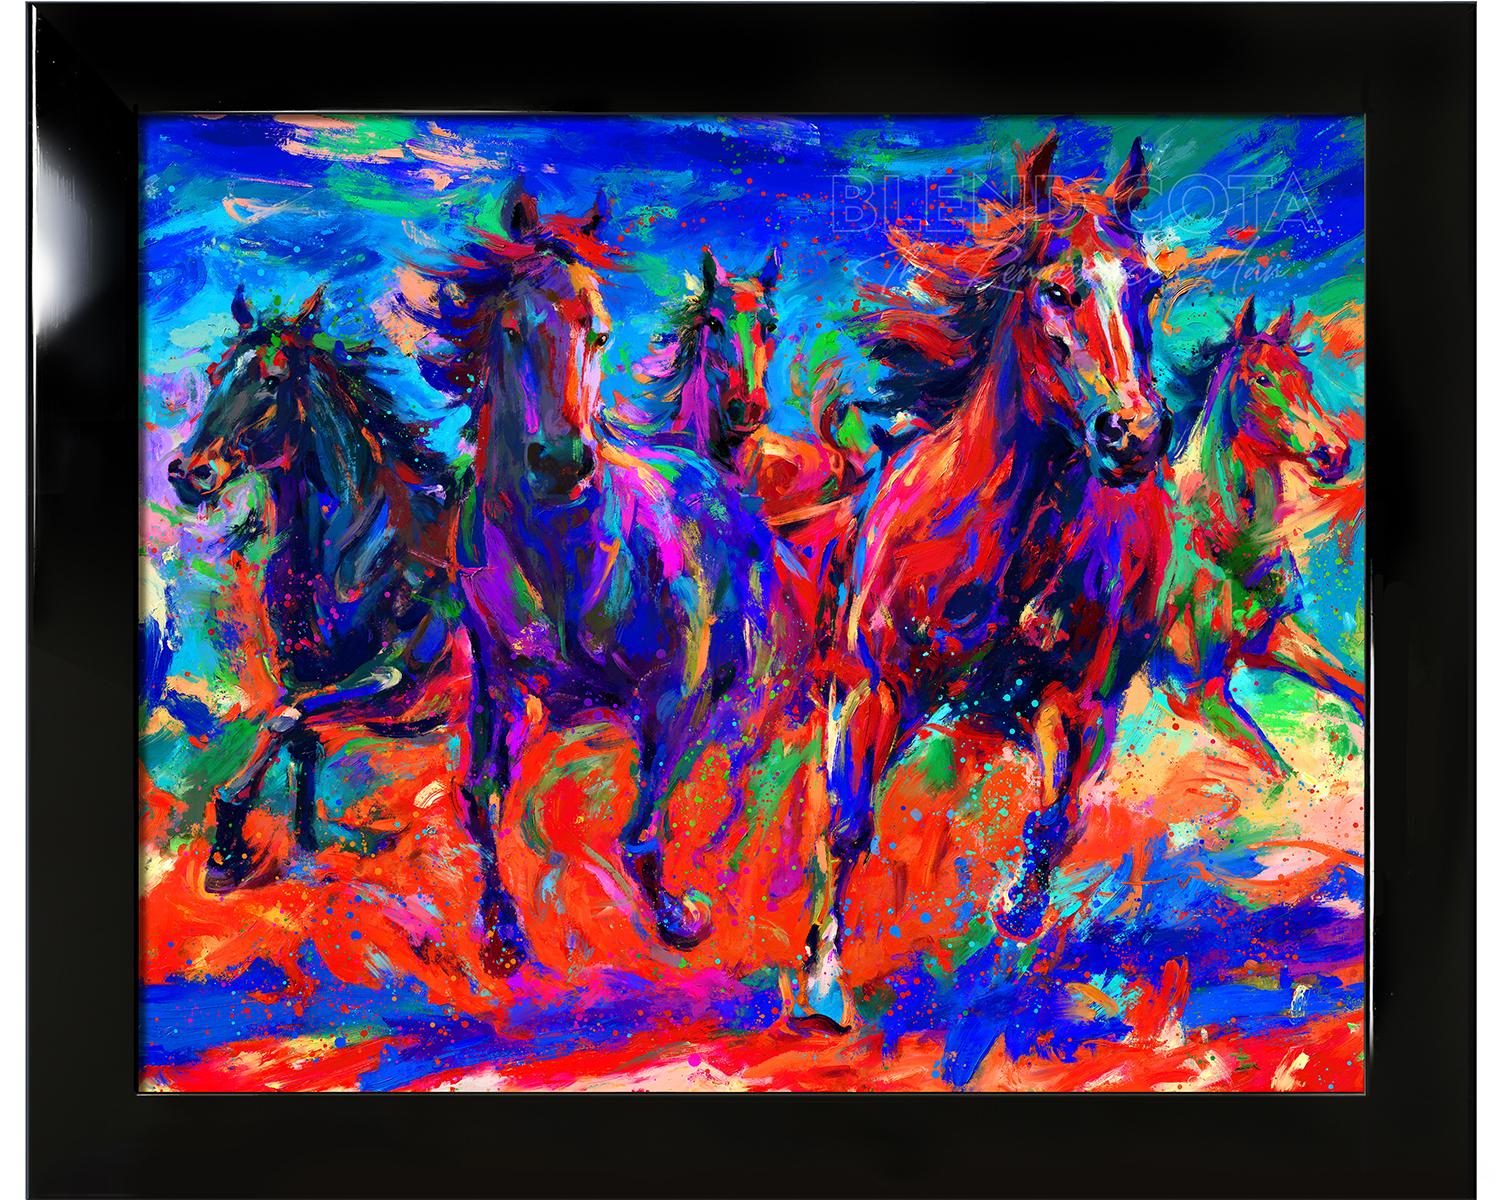 Gallop of the Wild - Original oil on canvas painting